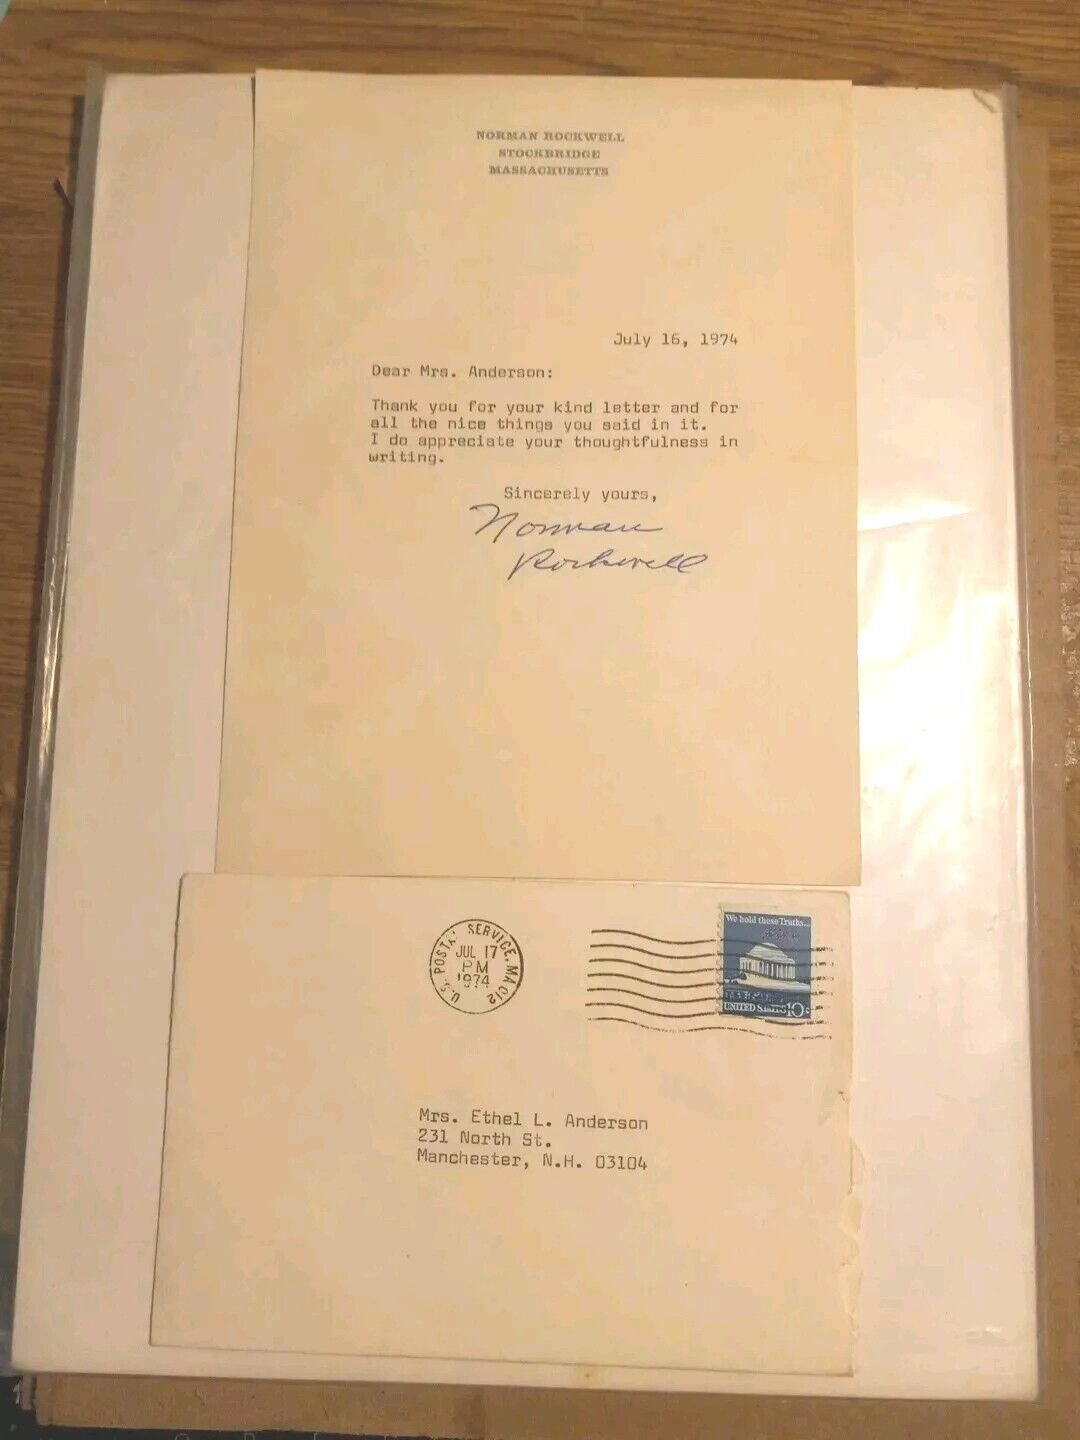 1974 Norman Rockwell signed letter with envelope